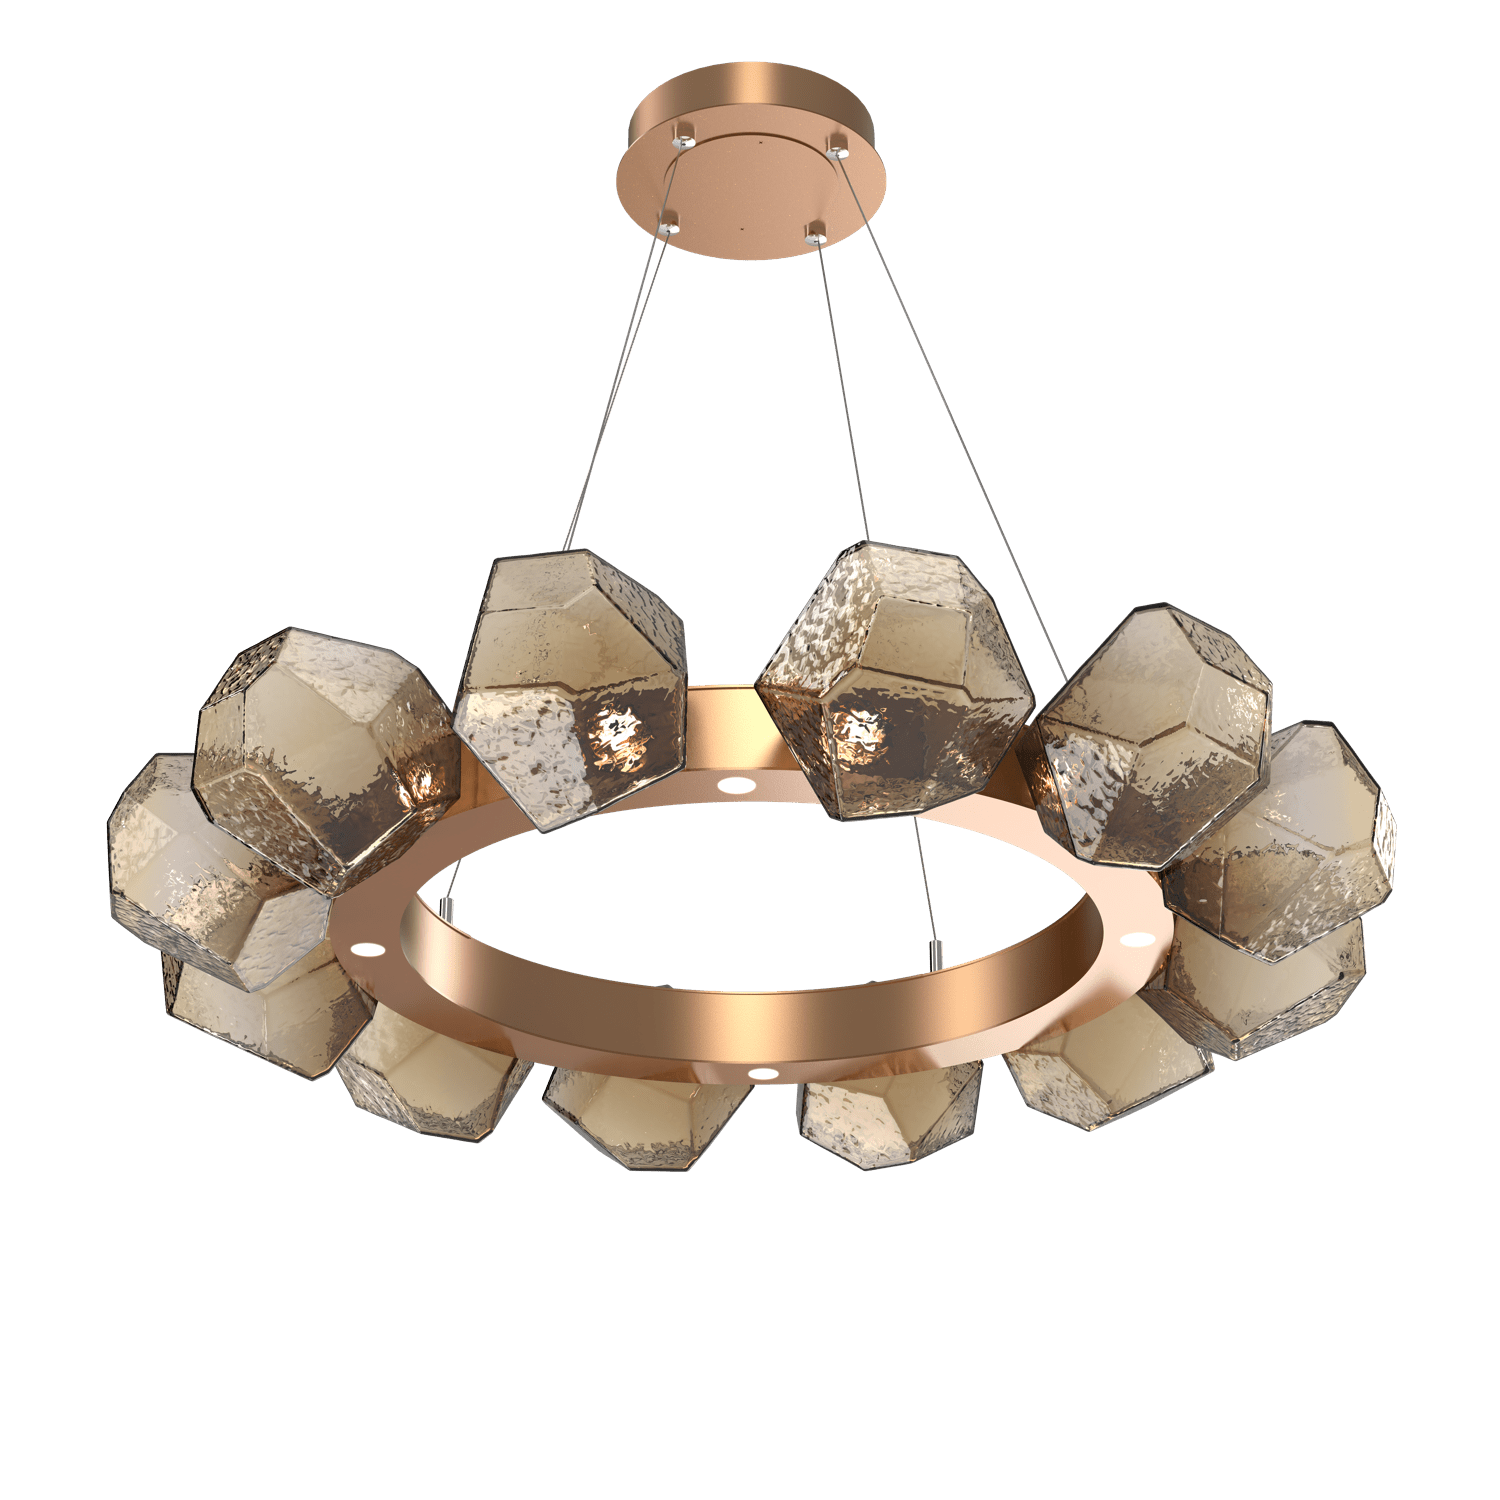 CHB0039-36-NB-B-Hammerton-Studio-Gem-36-inch-radial-ring-chandelier-with-novel-brass-finish-and-bronze-blown-glass-shades-and-LED-lamping